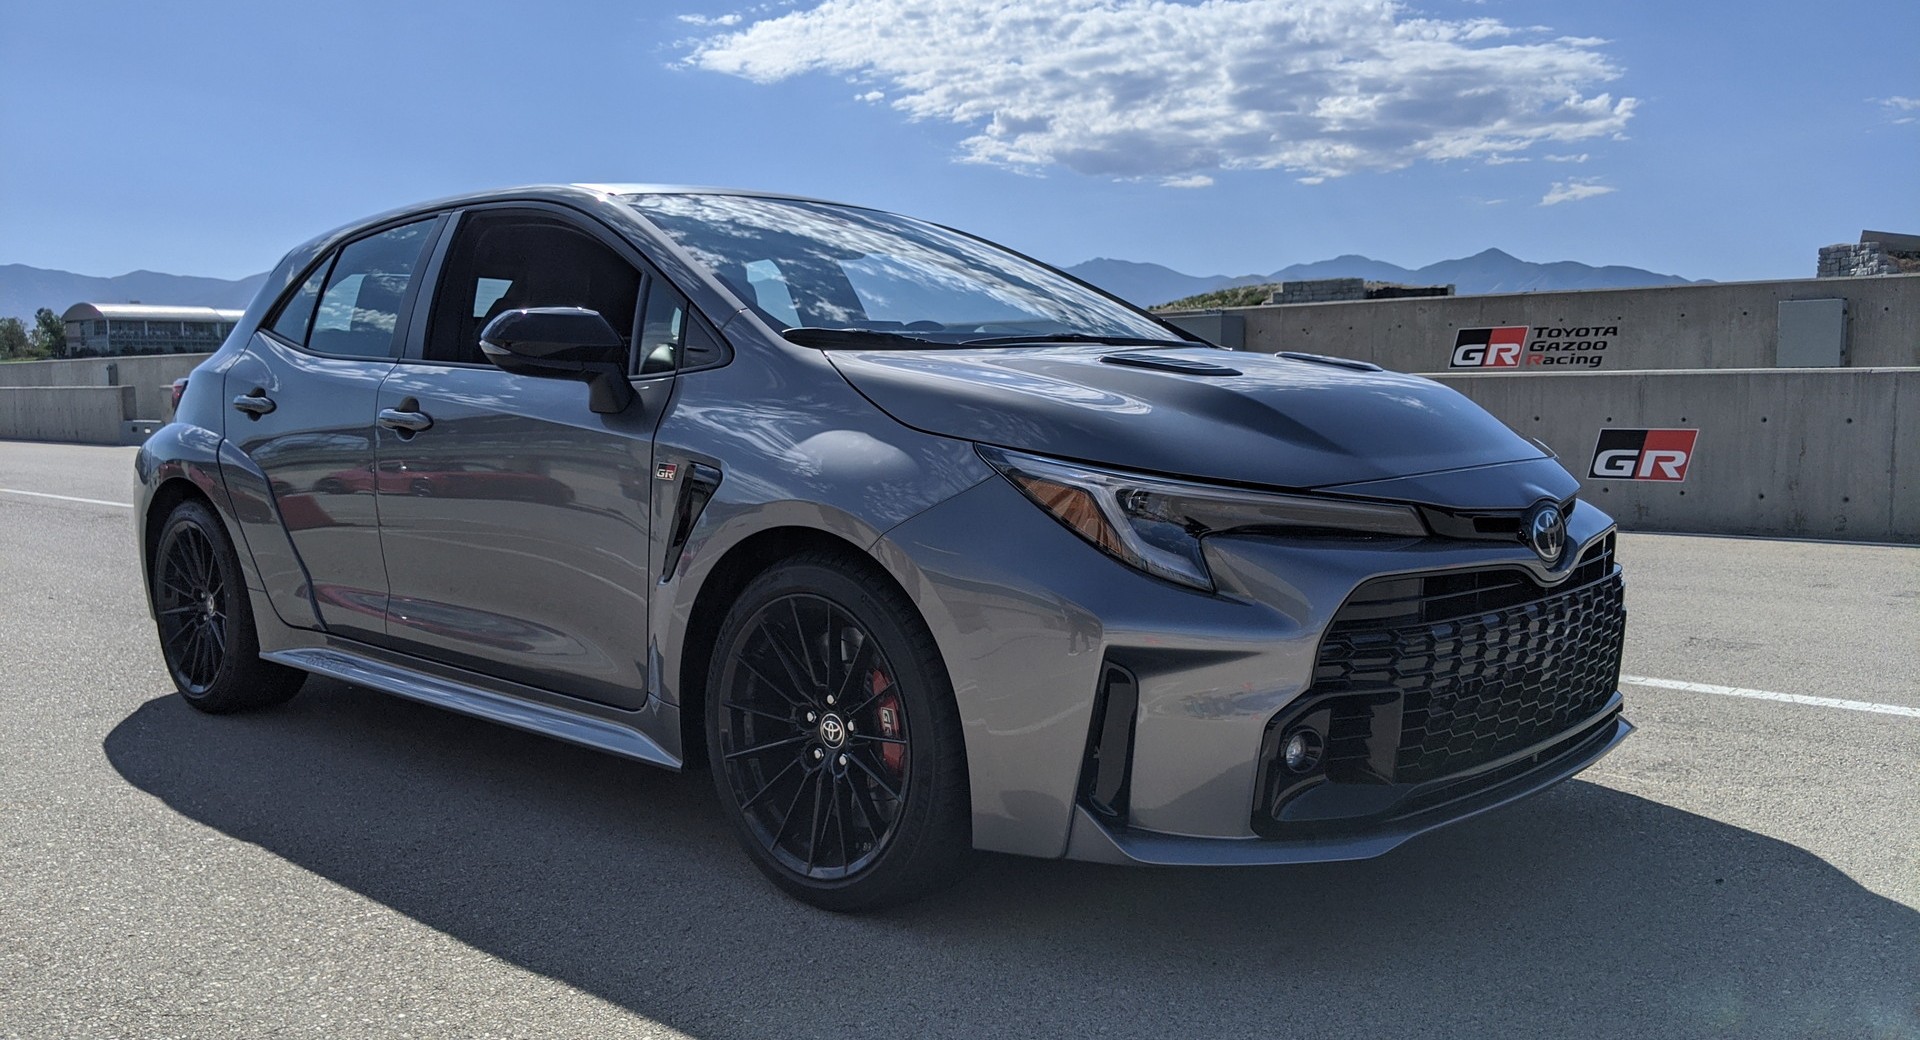 2023 Toyota GR Corolla Pricing Revealed, Ranges From $35,900 To $49,900